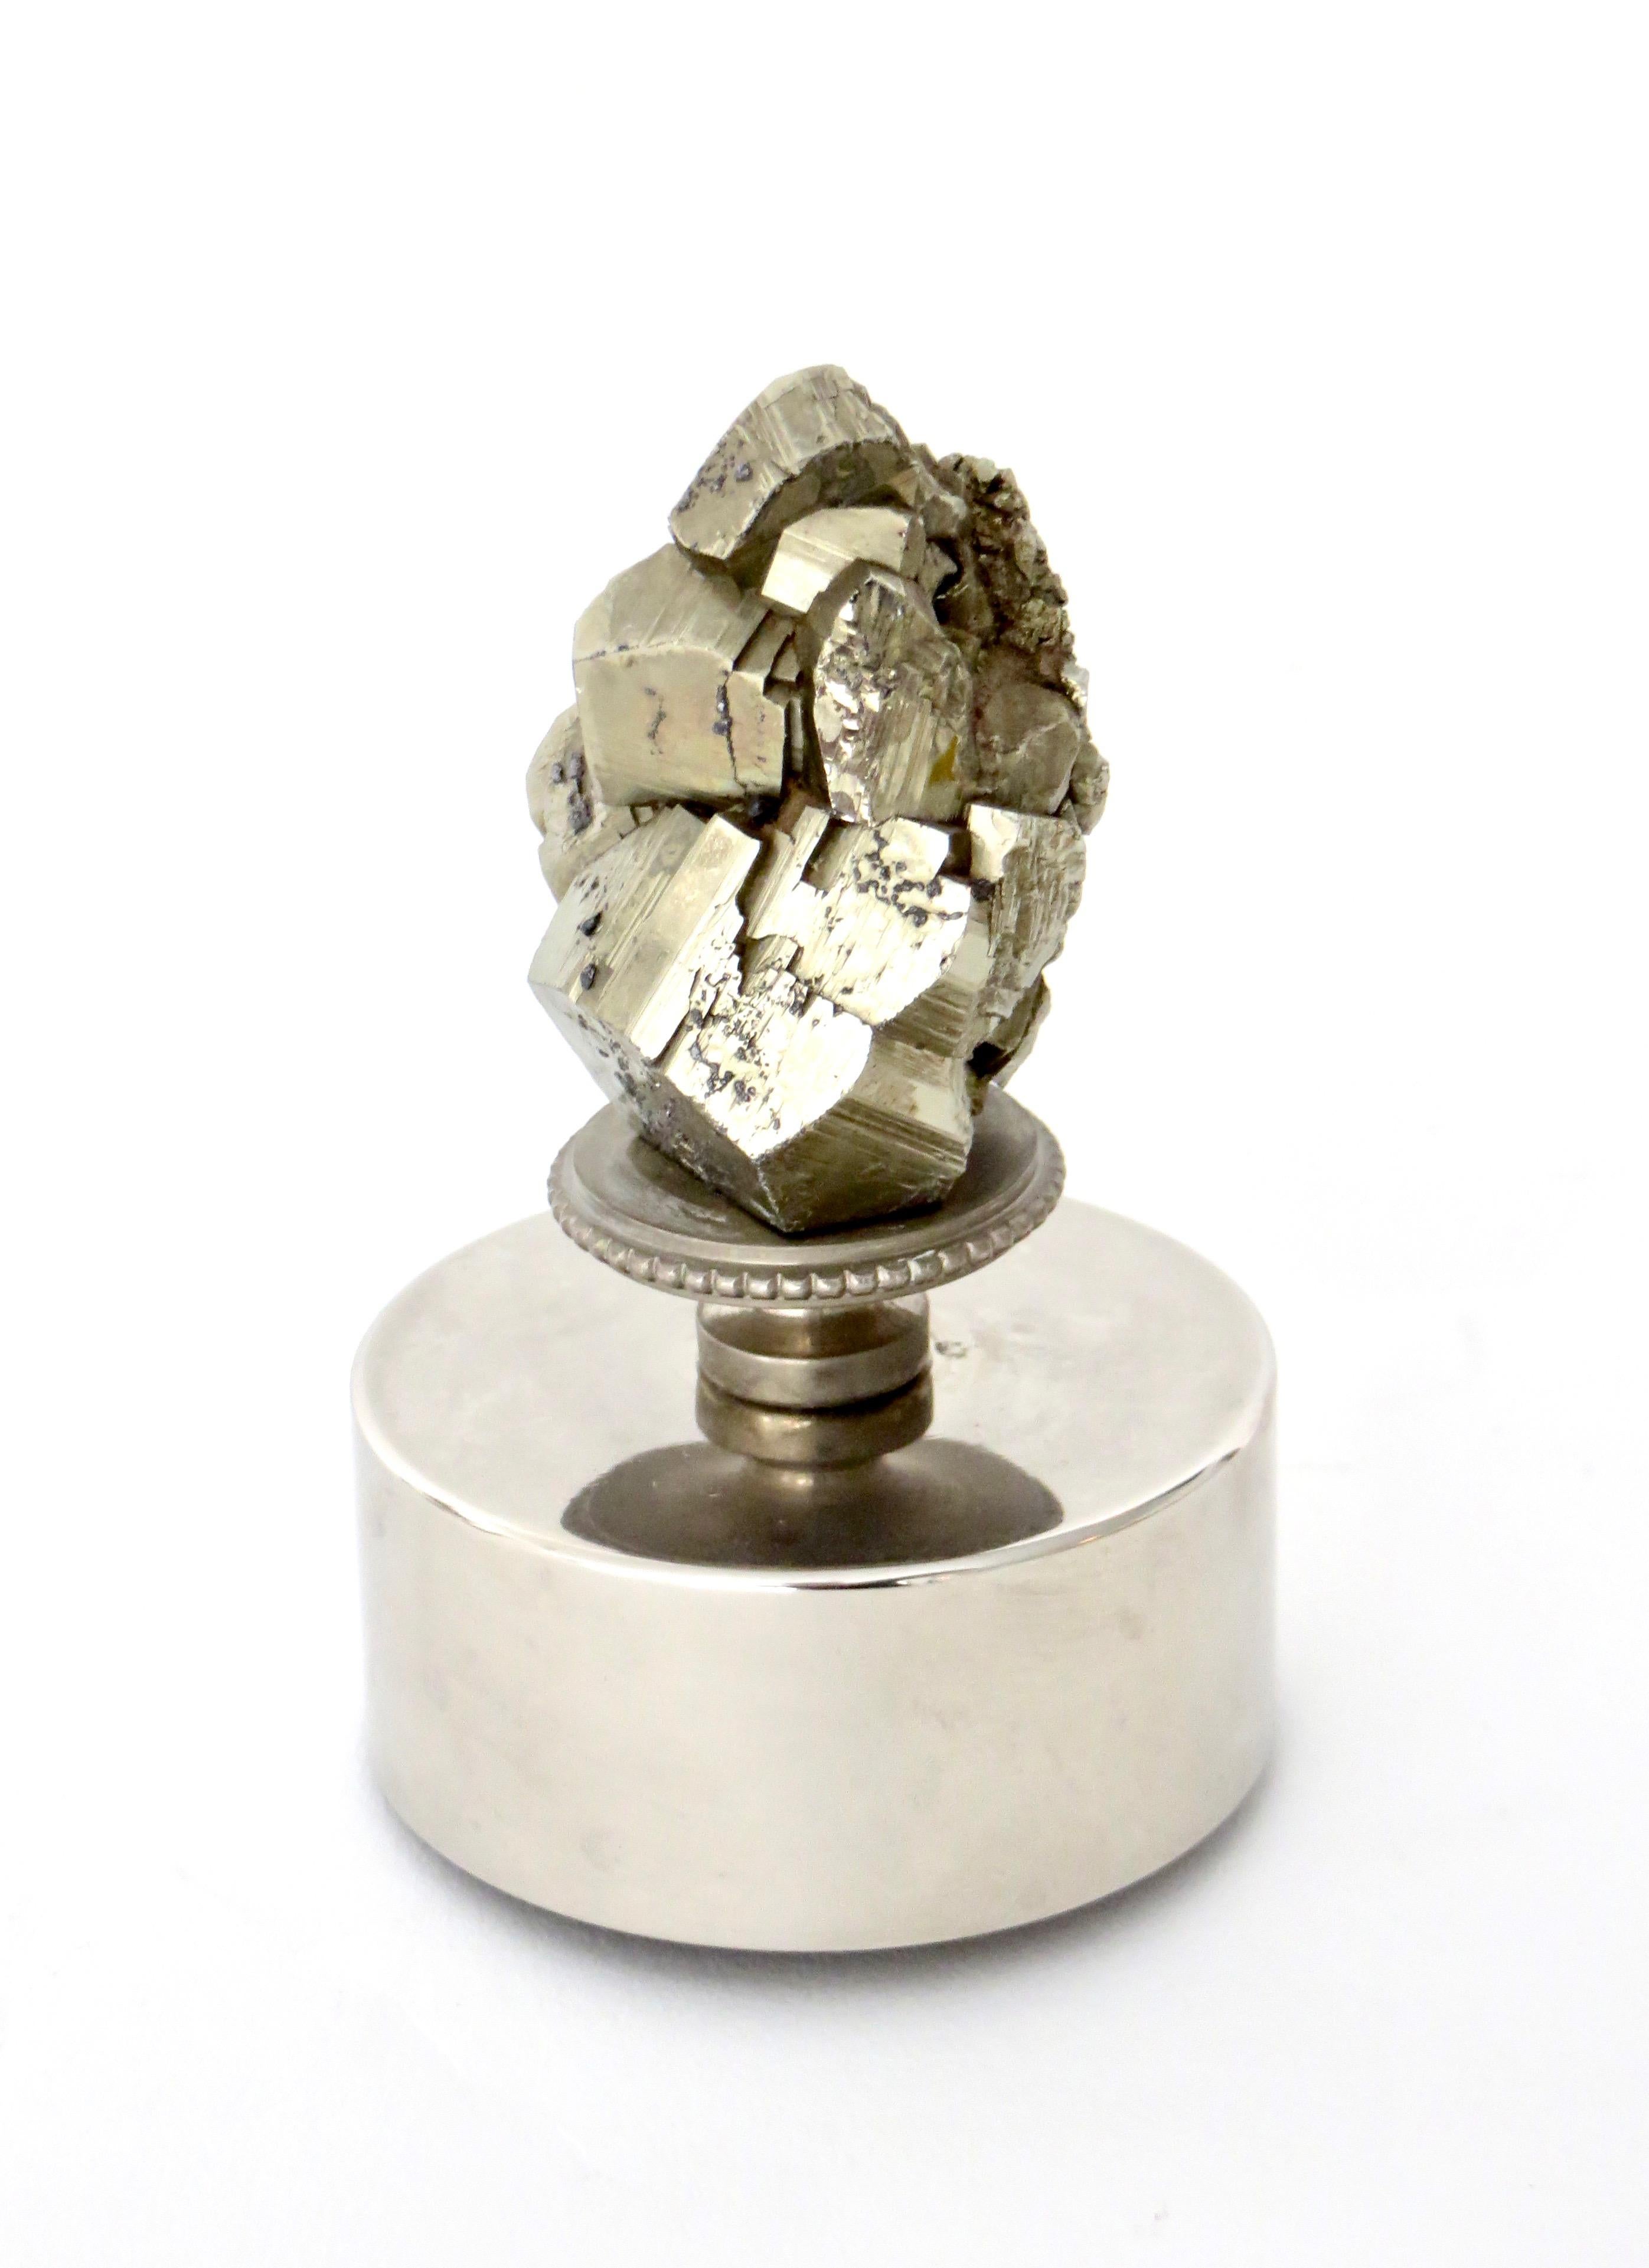 Mid-20th Century Christian Dior Silver Plate Carafe Stopper Natural Pyrite Specimen Decoration